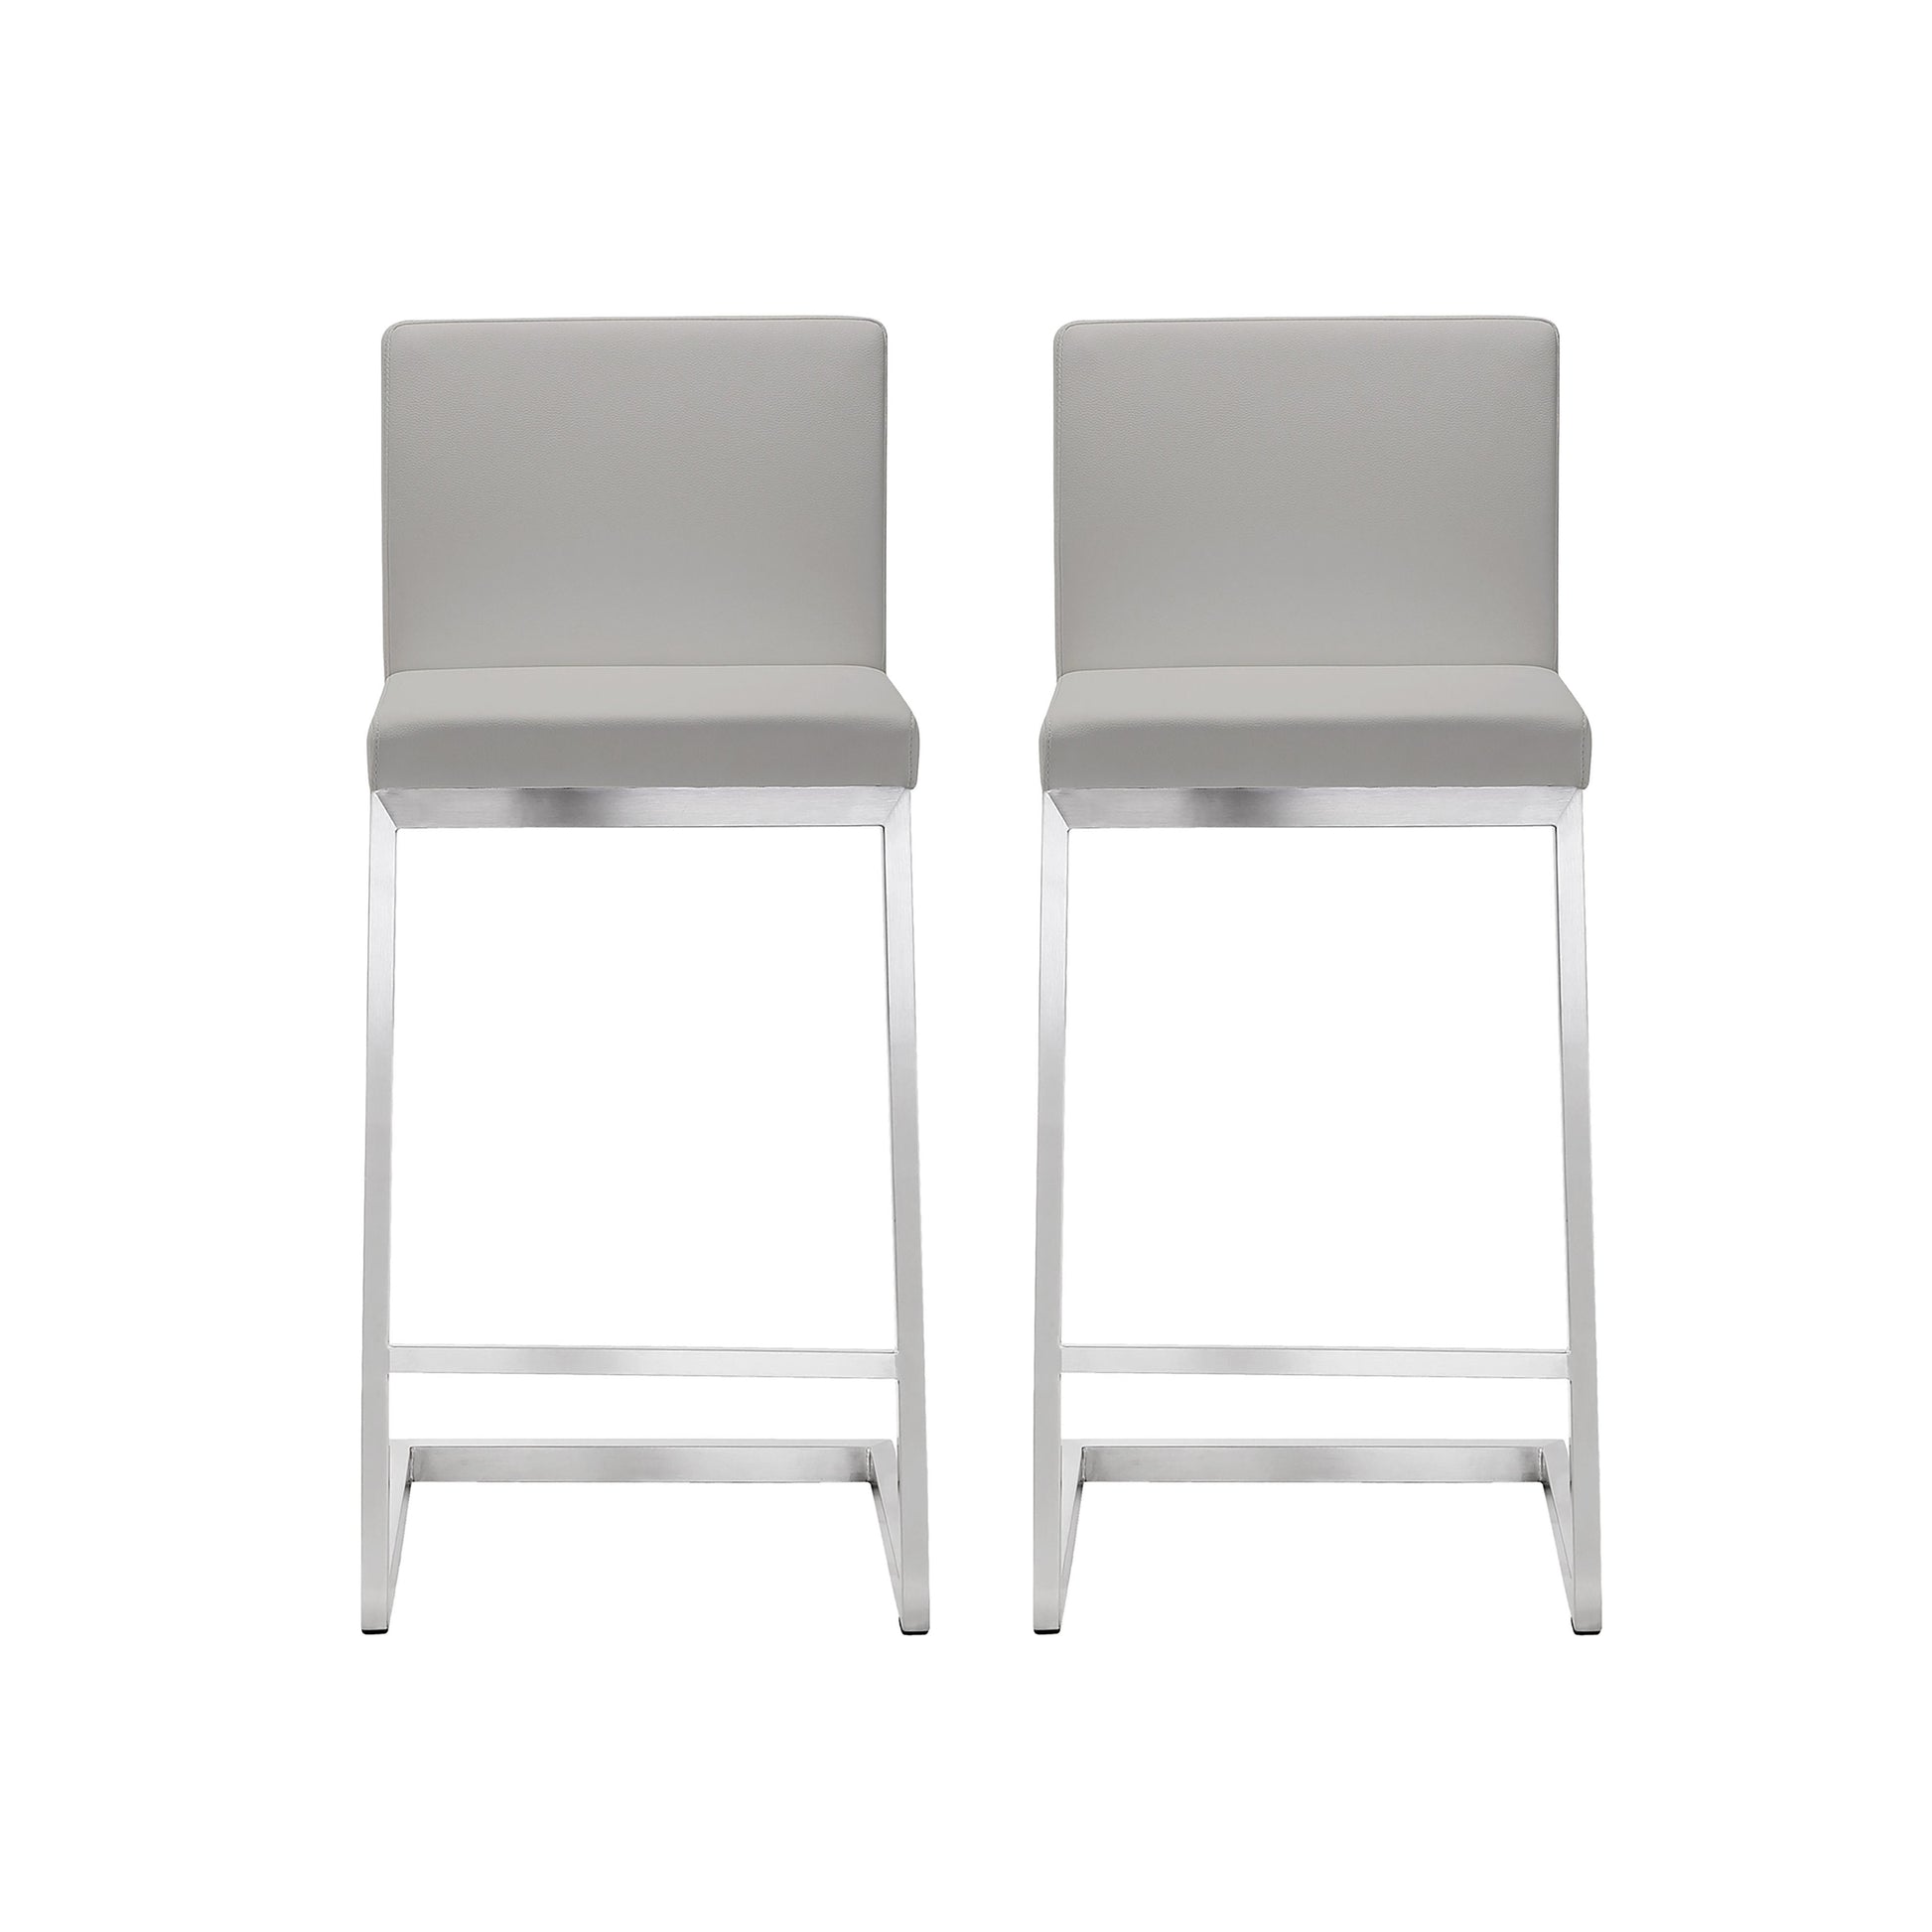 Tov Furniture Parma Light Grey Stainless Steel Counter Stool Set of 2